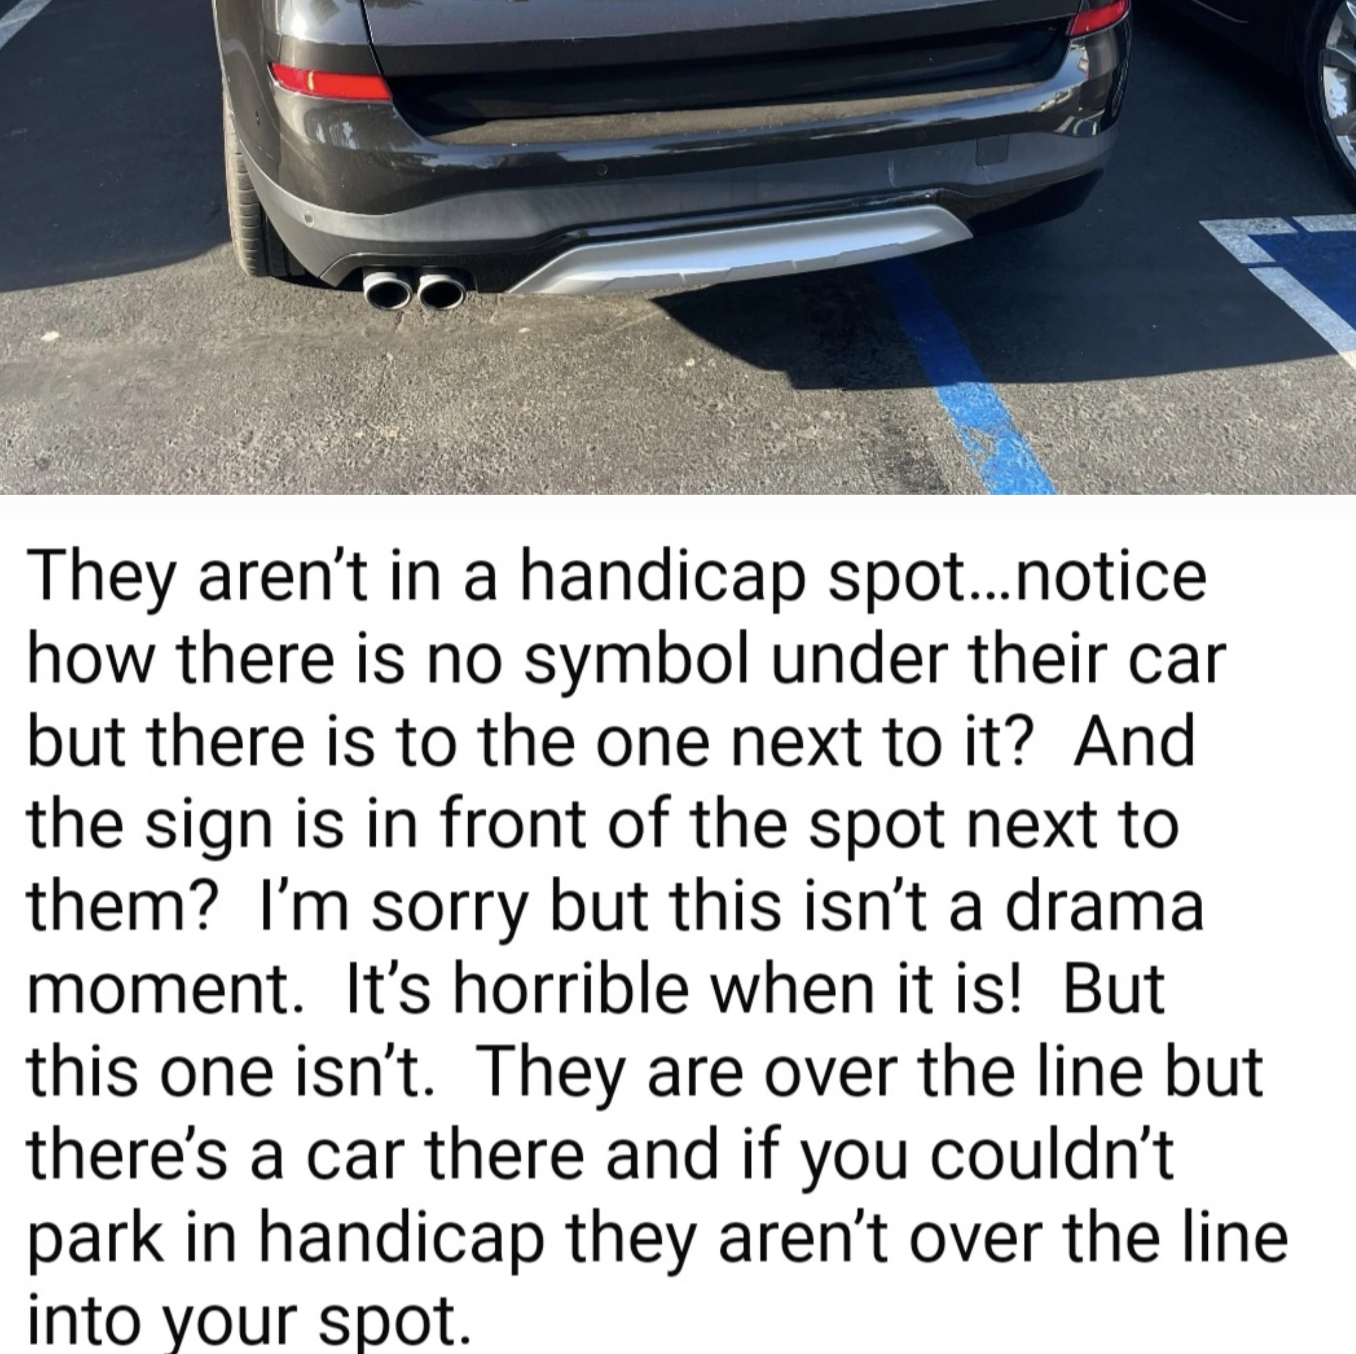 Confidently Incorrect - car - They aren't in a handicap spot...notice how there is no symbol under their car but there is to the one next to it? And the sign is in front of the spot next to them?